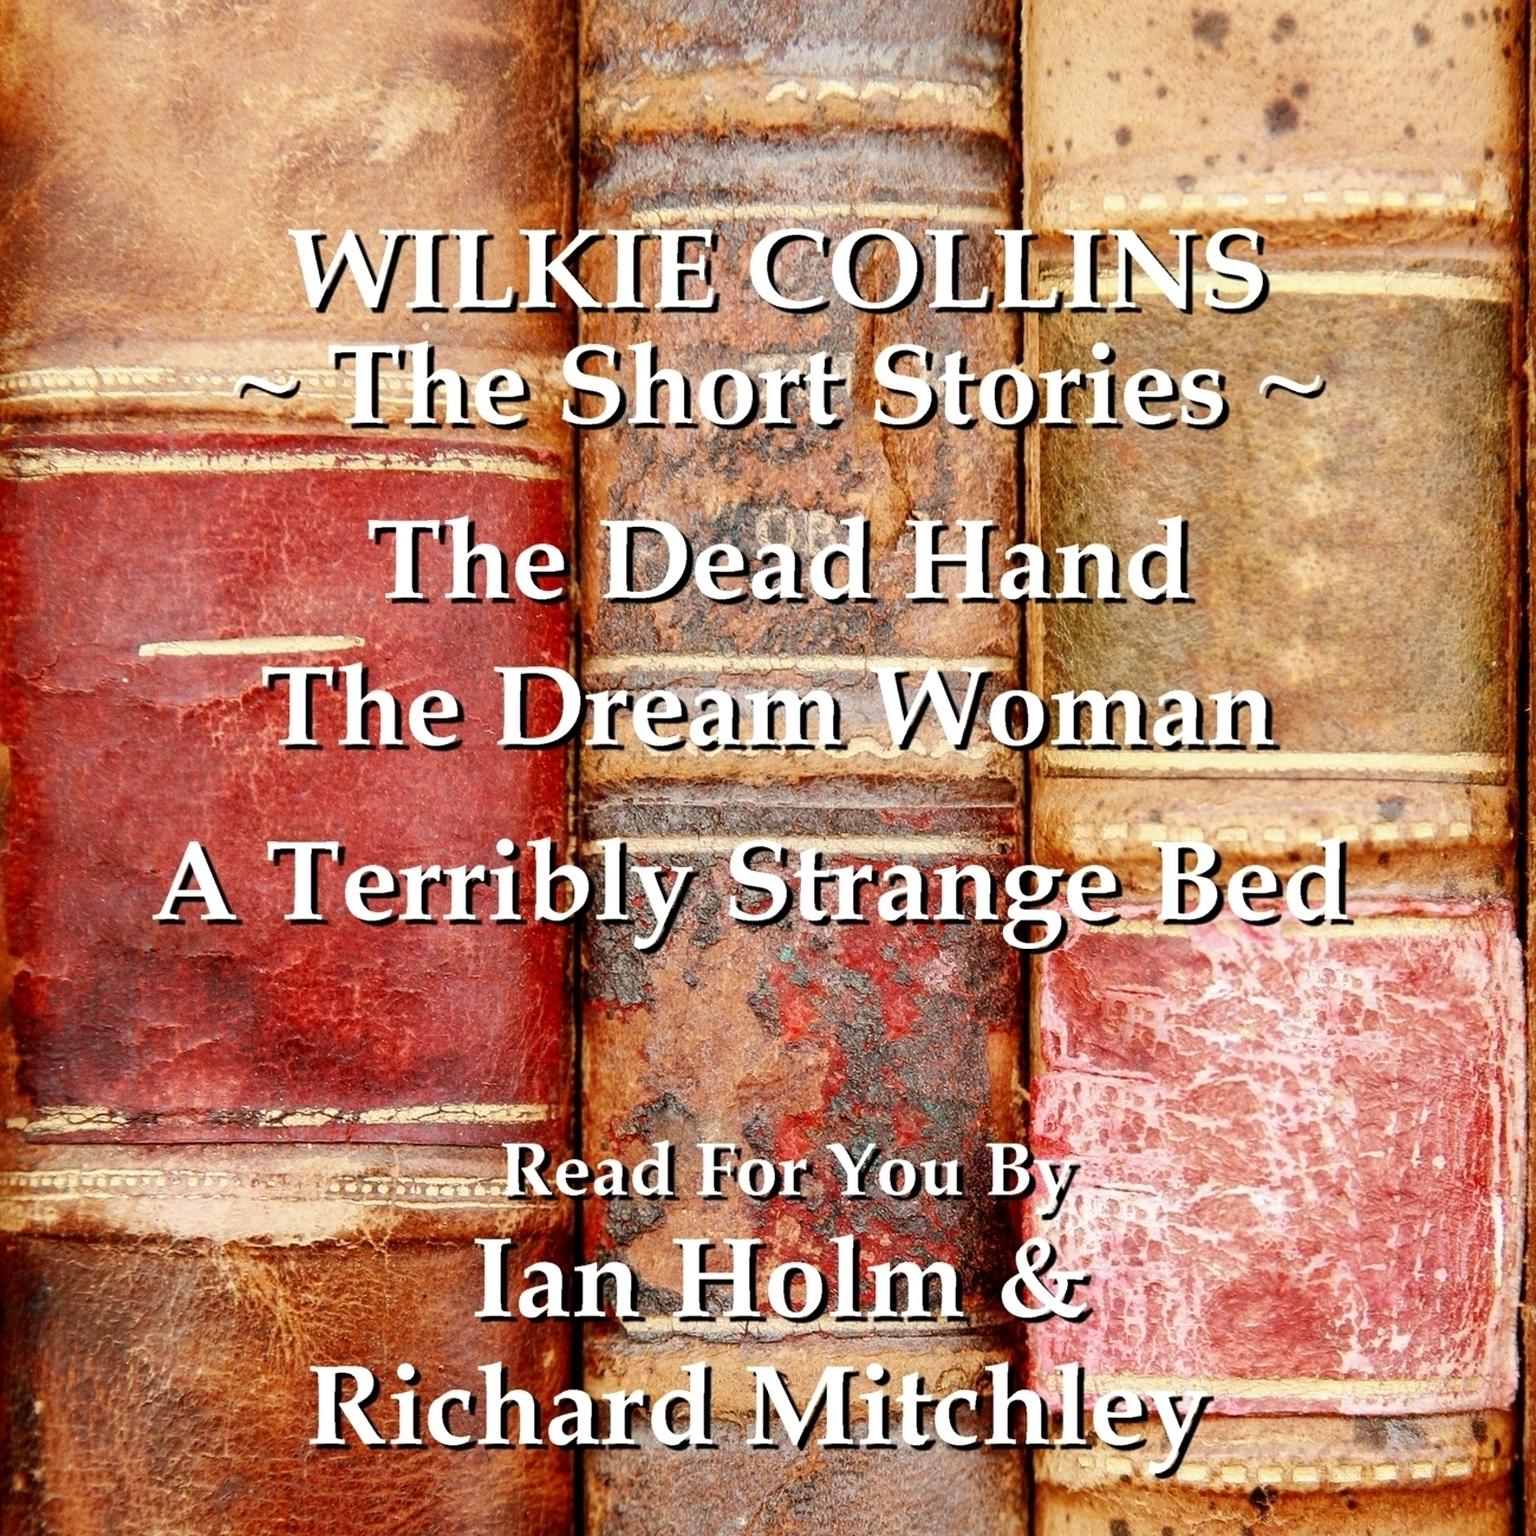 Wilkie Collins: The Short Stories: The Dead Hand, the Dream Woman & A Terribly Strange Bed Audiobook, by Wilkie Collins